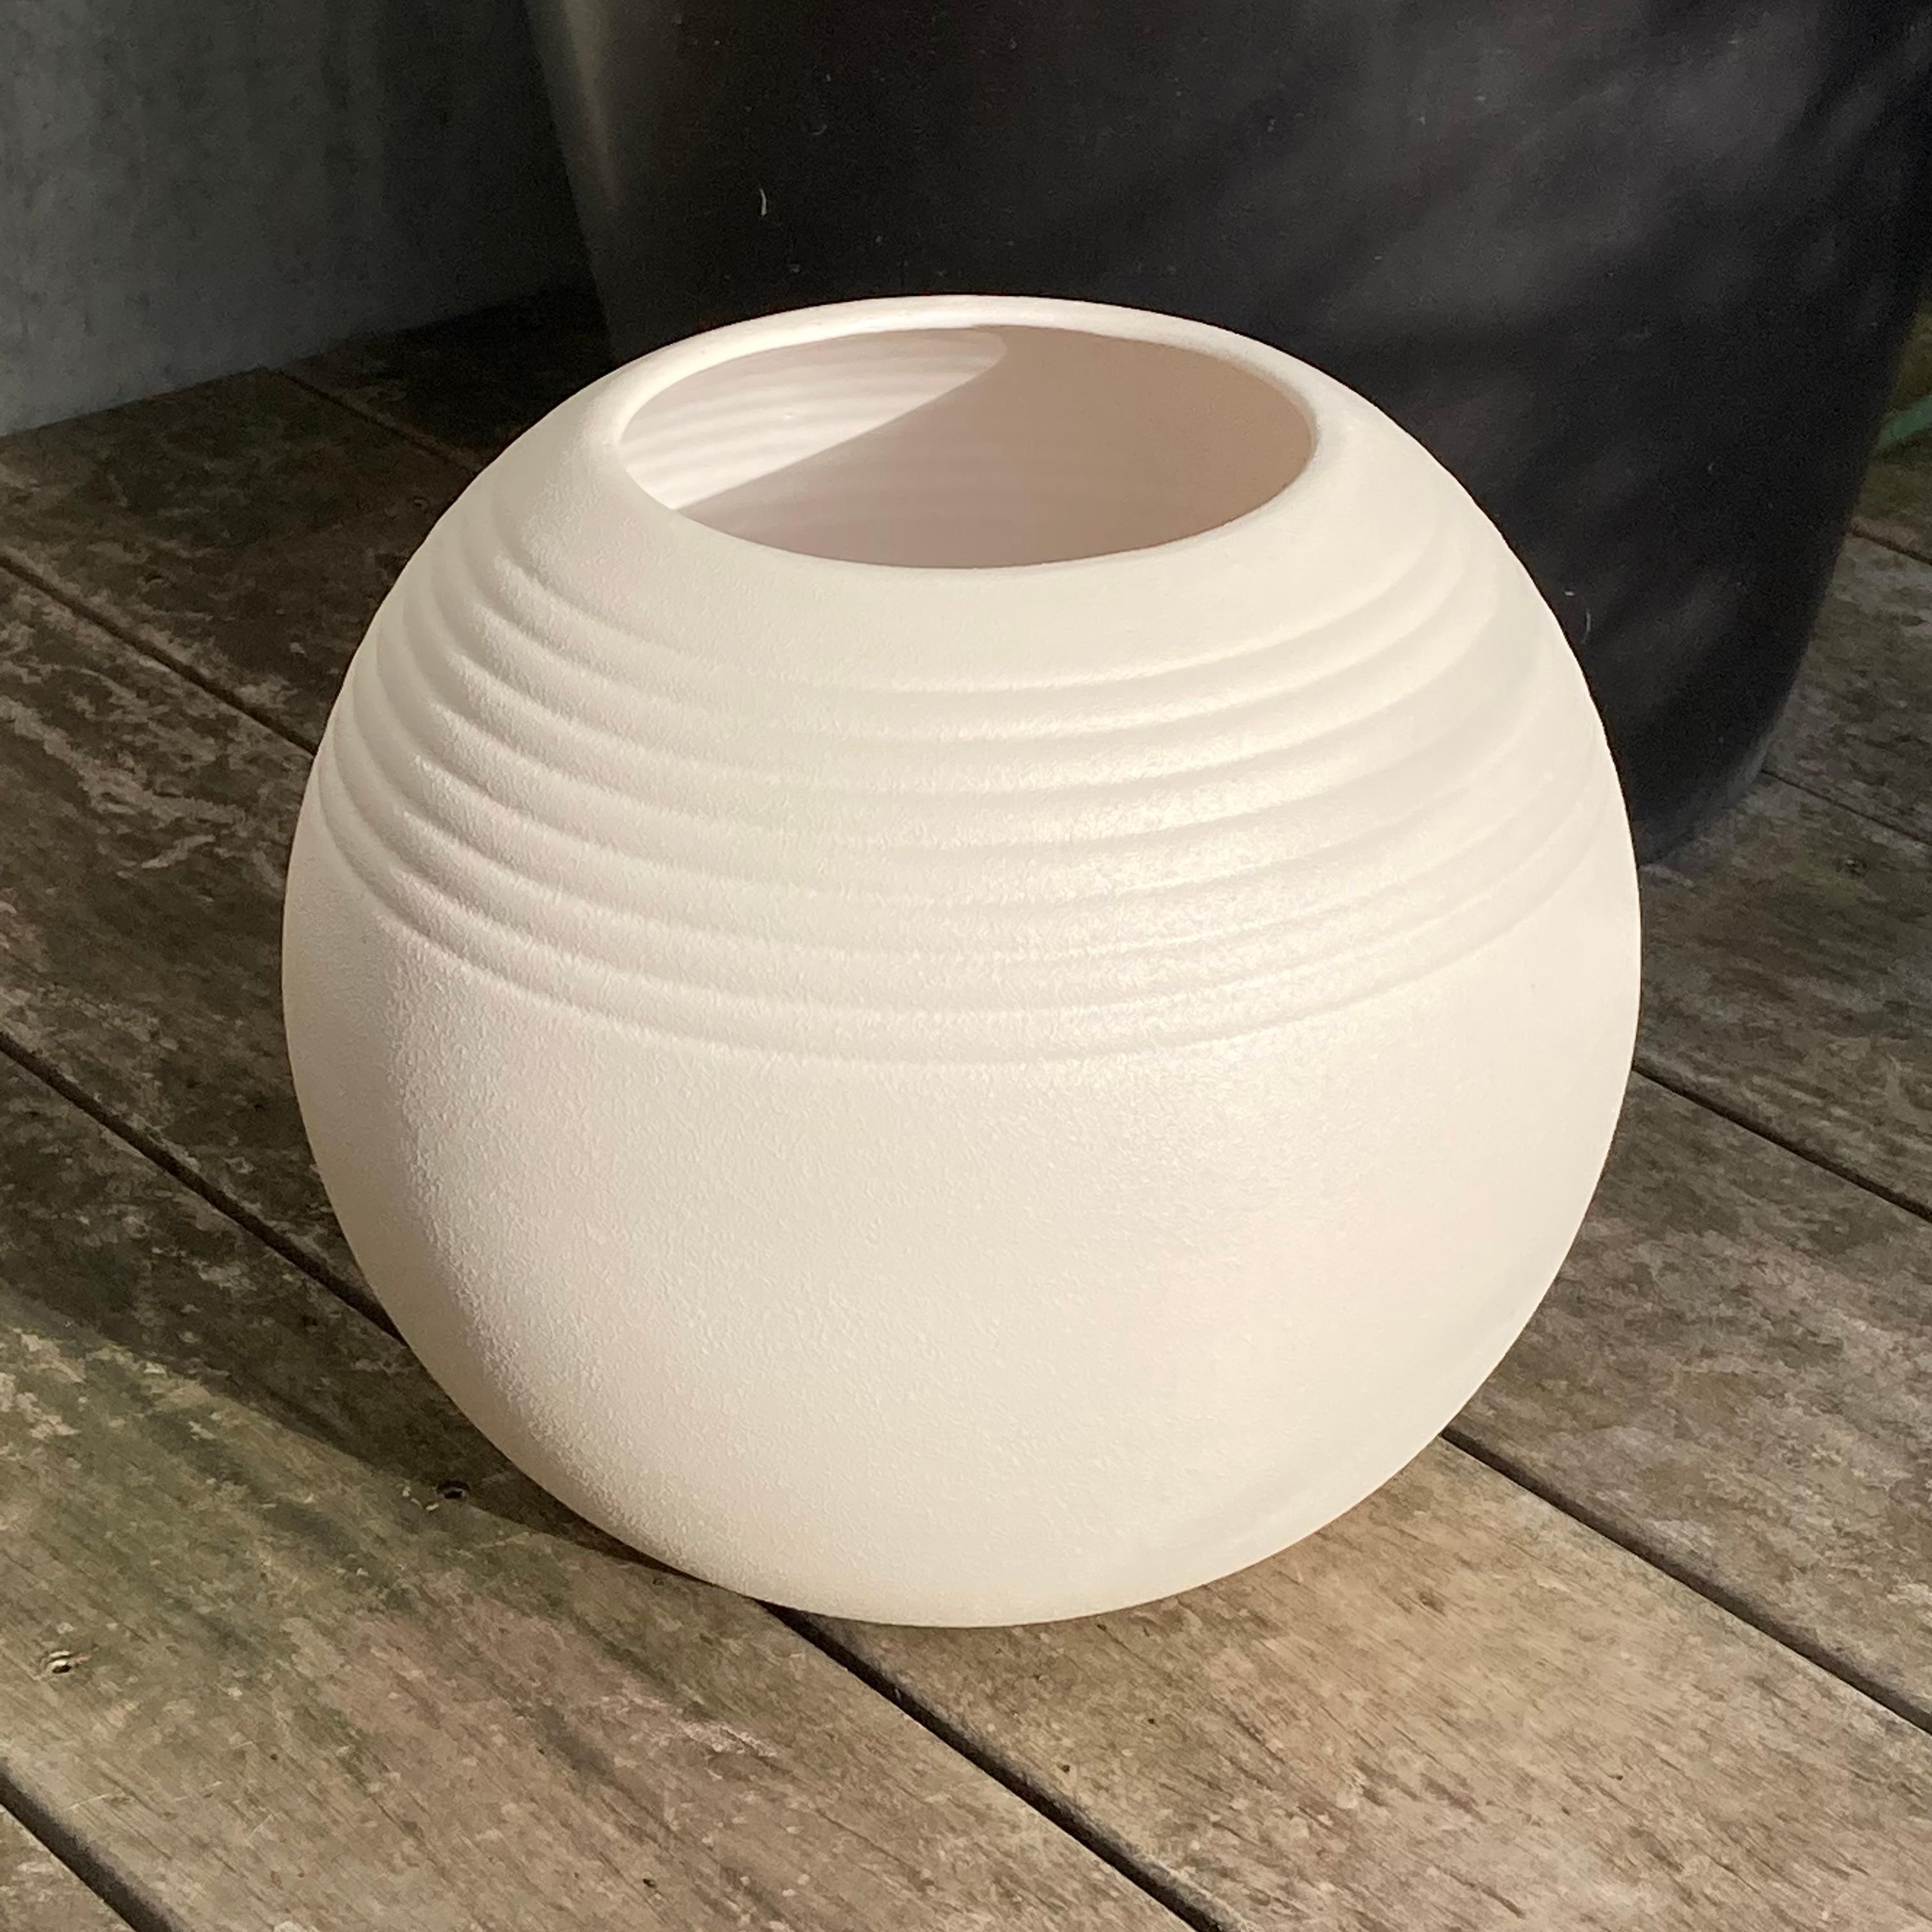 This authentic 1960s ceramic vase is just timeless! With its minimalist shape and decor, it is not only a mid-century modern collector's item but a fantastic, contemporary, decor item.  

This large and impressive round vase was is made by the